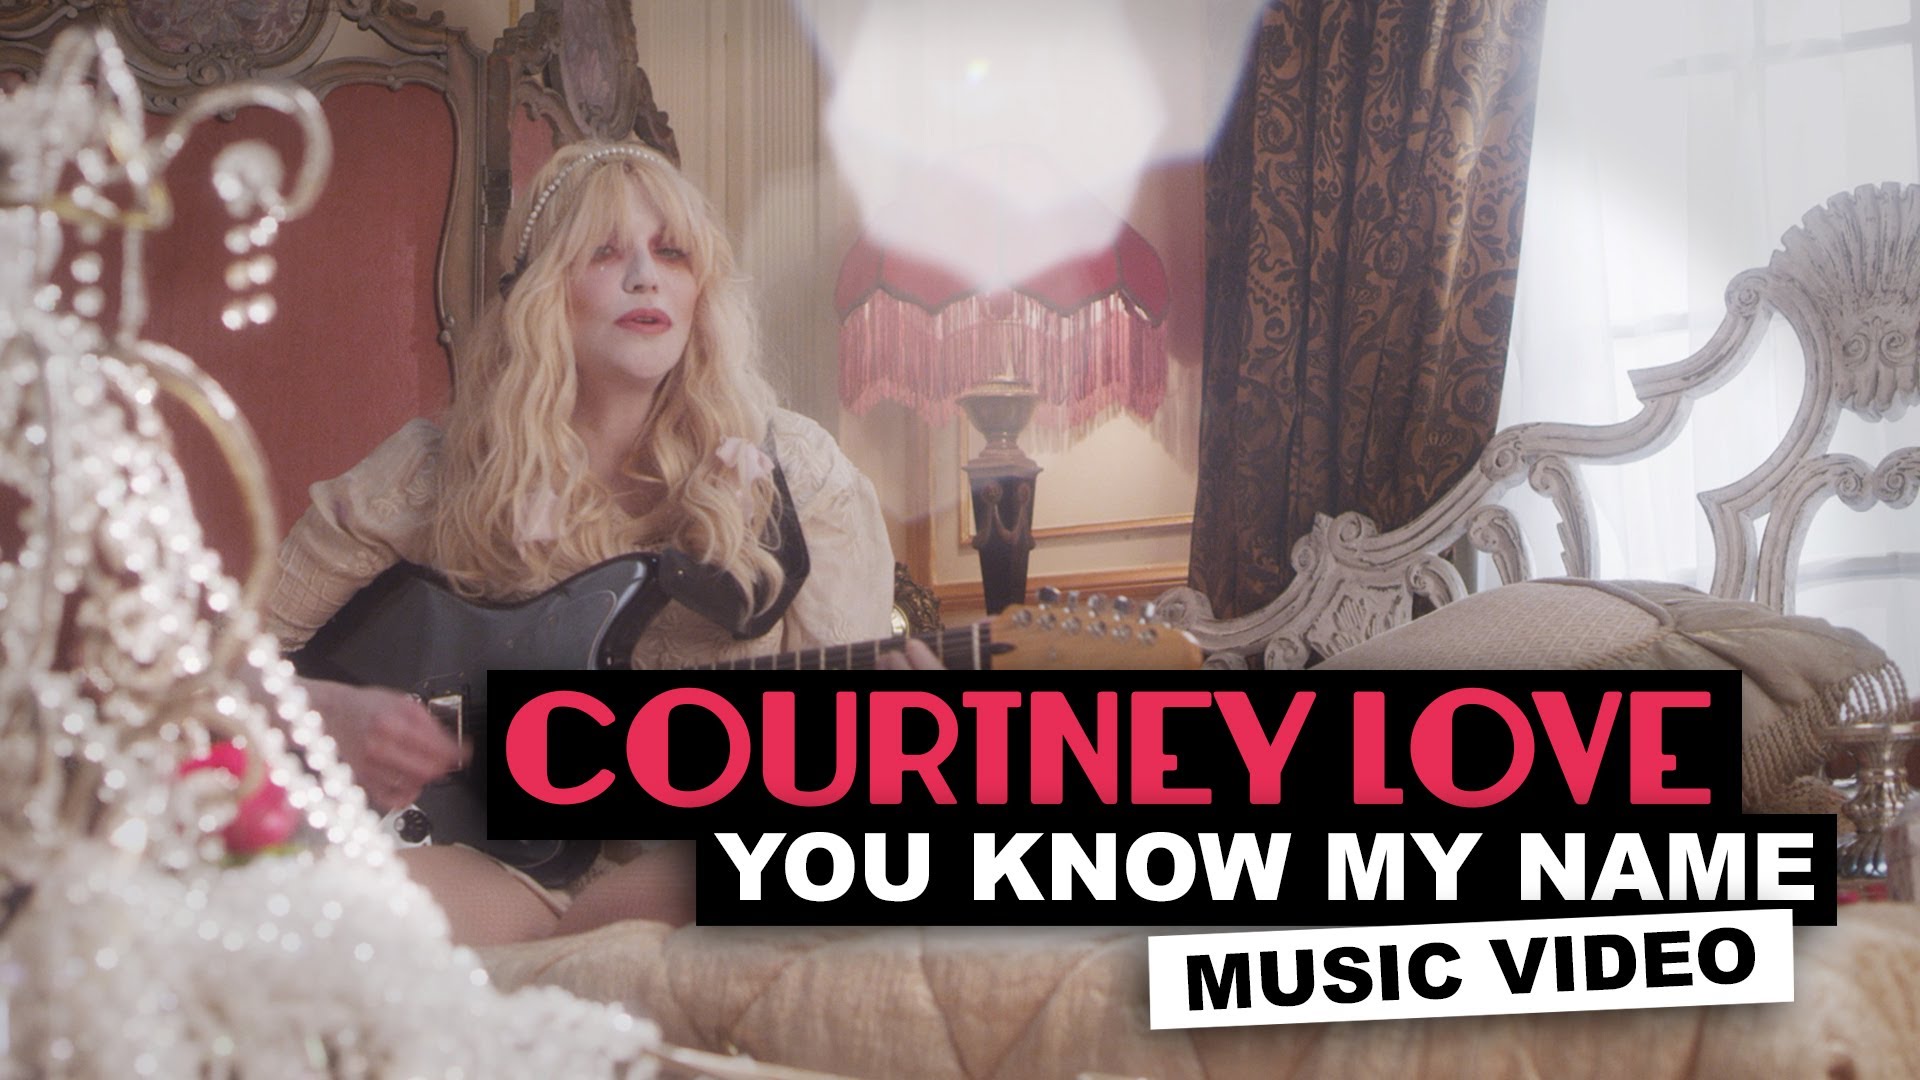 Hot video pick: Courtney Love- You Know My Name